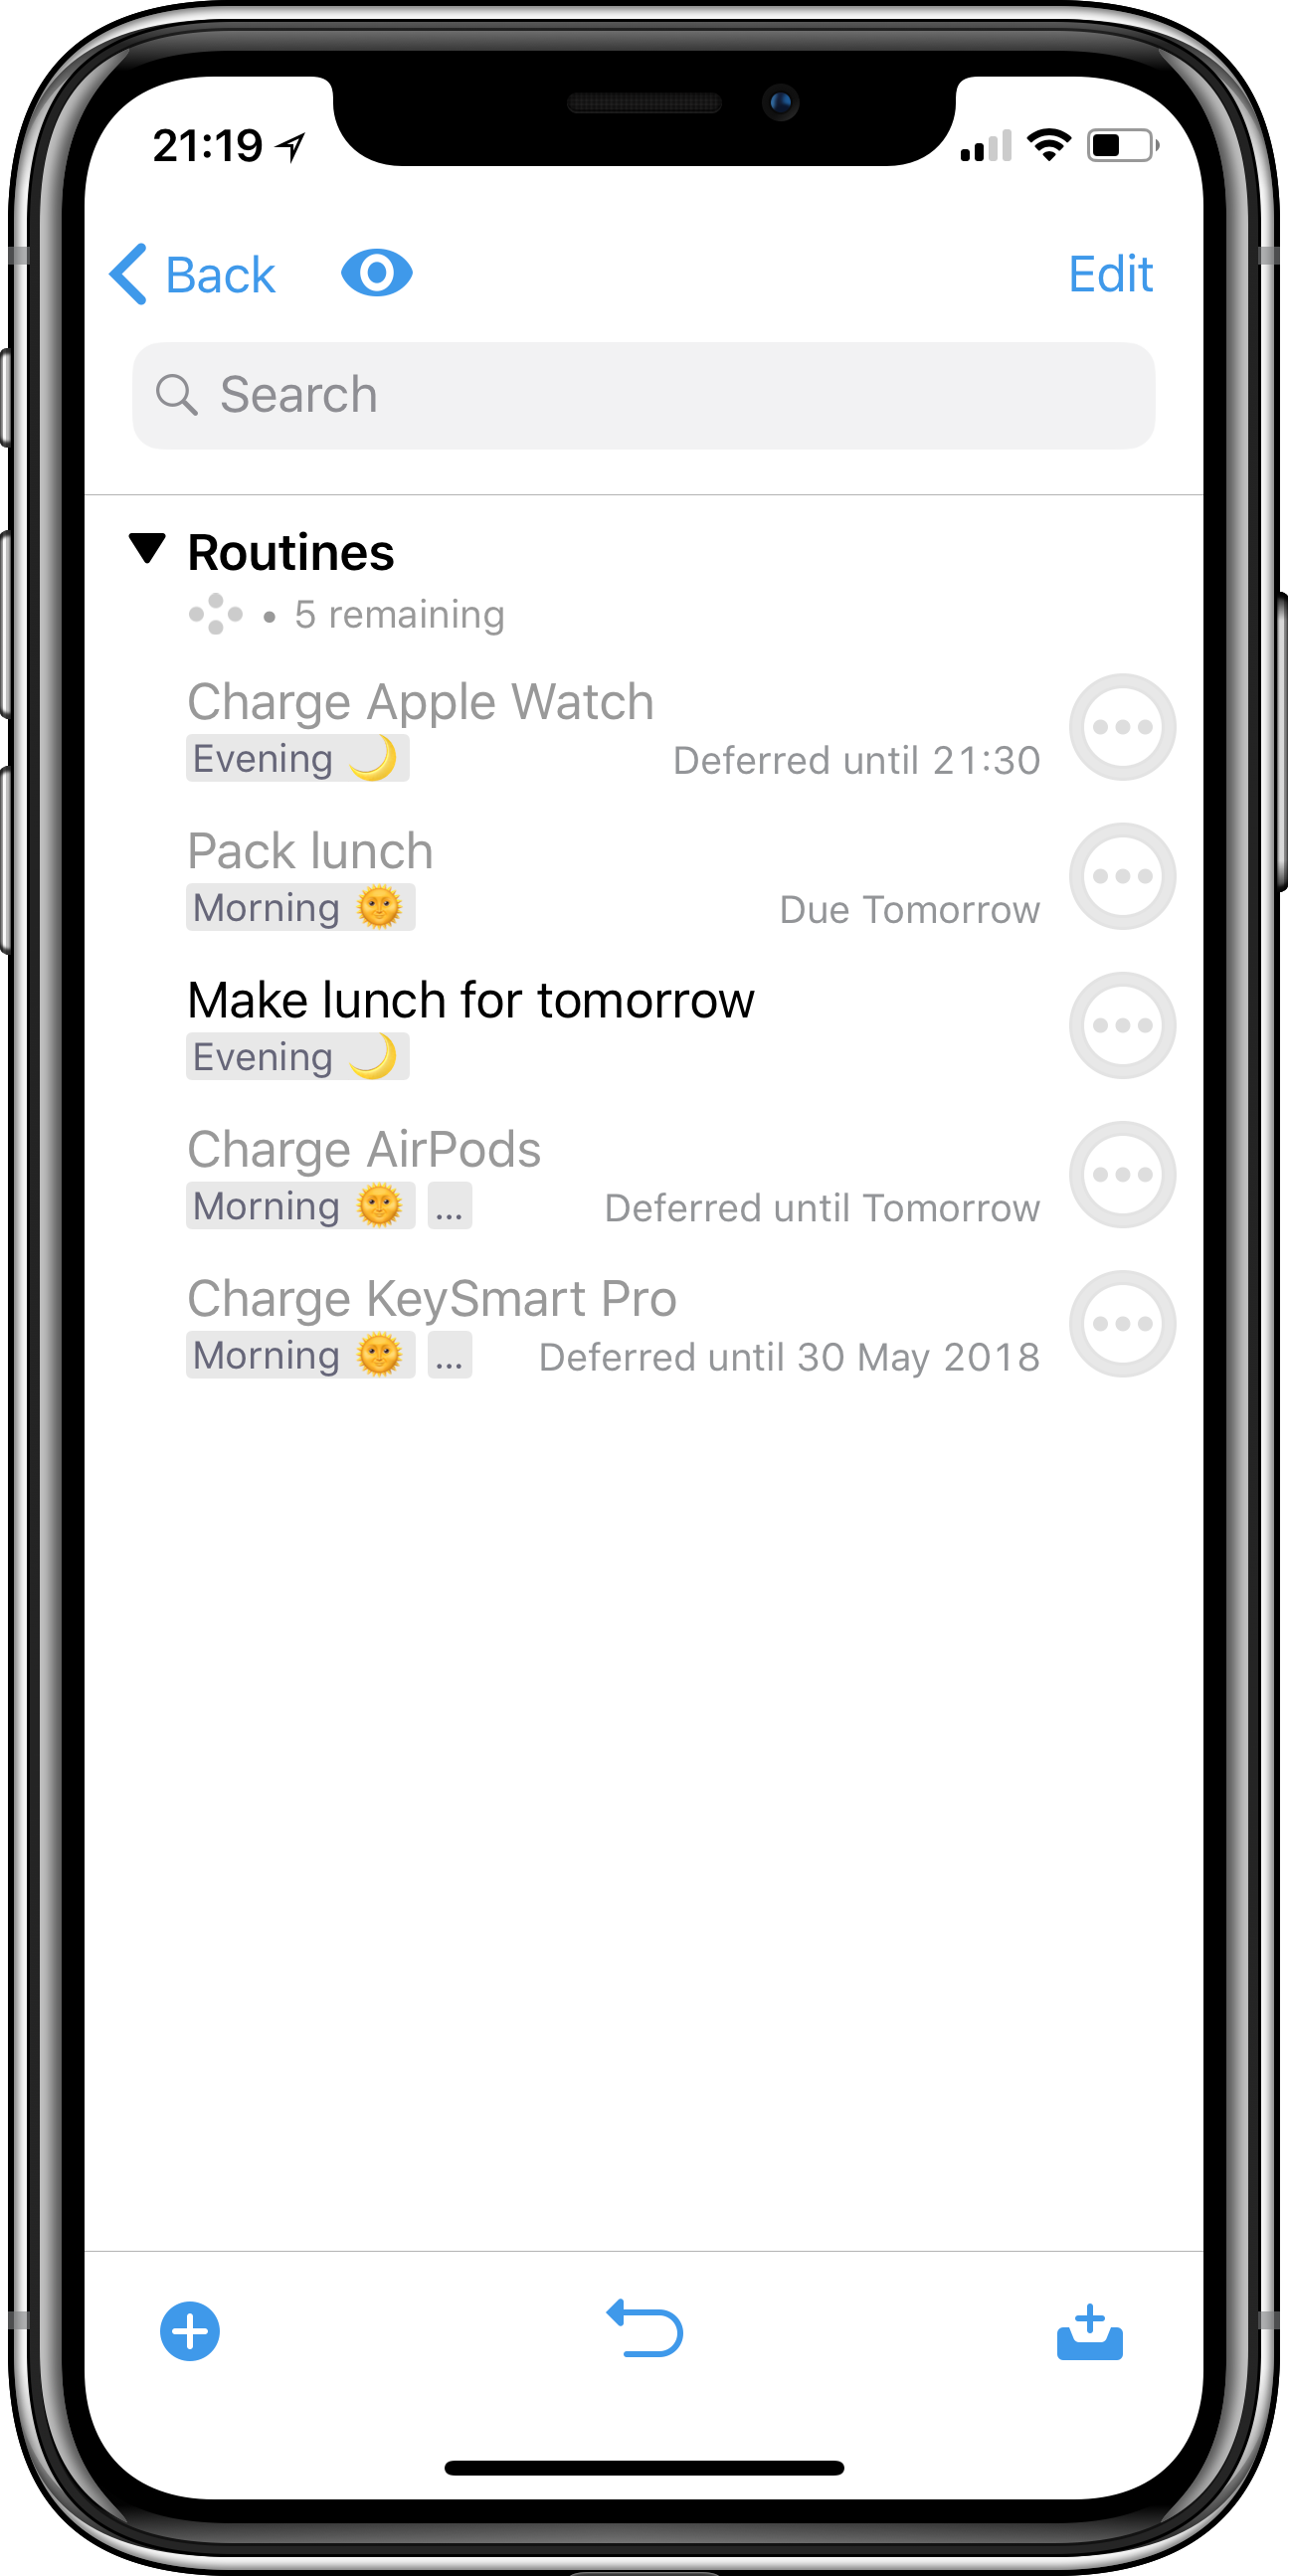 OmniFocus screenshot showing Rose’s Routines project with several tasks such as Charge Apple Watch, Pack Lunch, and so on